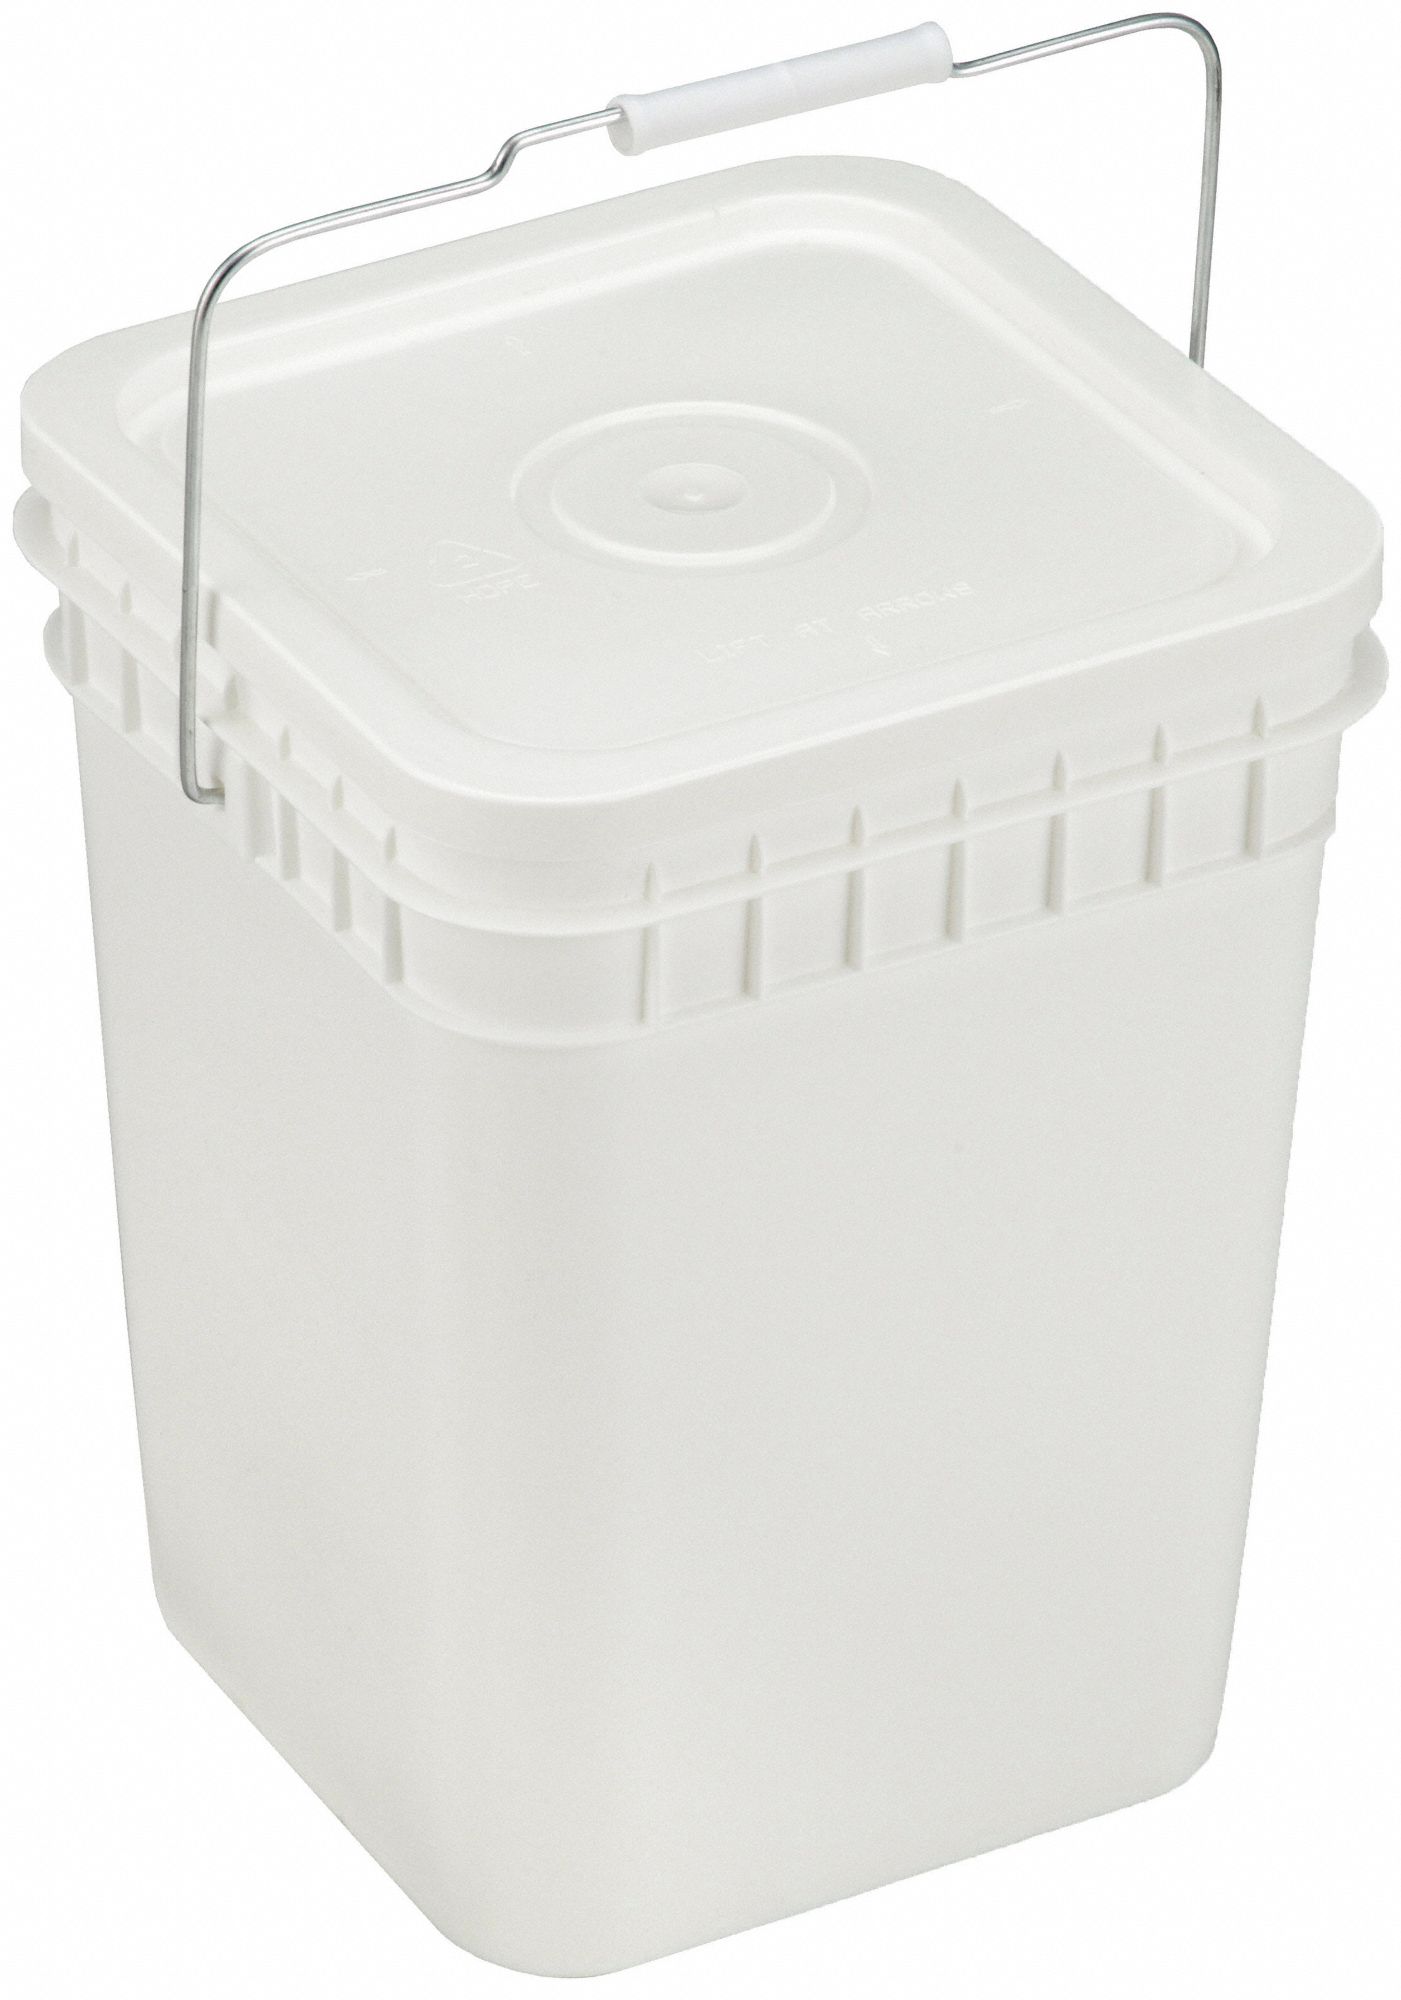 Diamond Square Pail, 4 Gal, White, Industrial Container P316